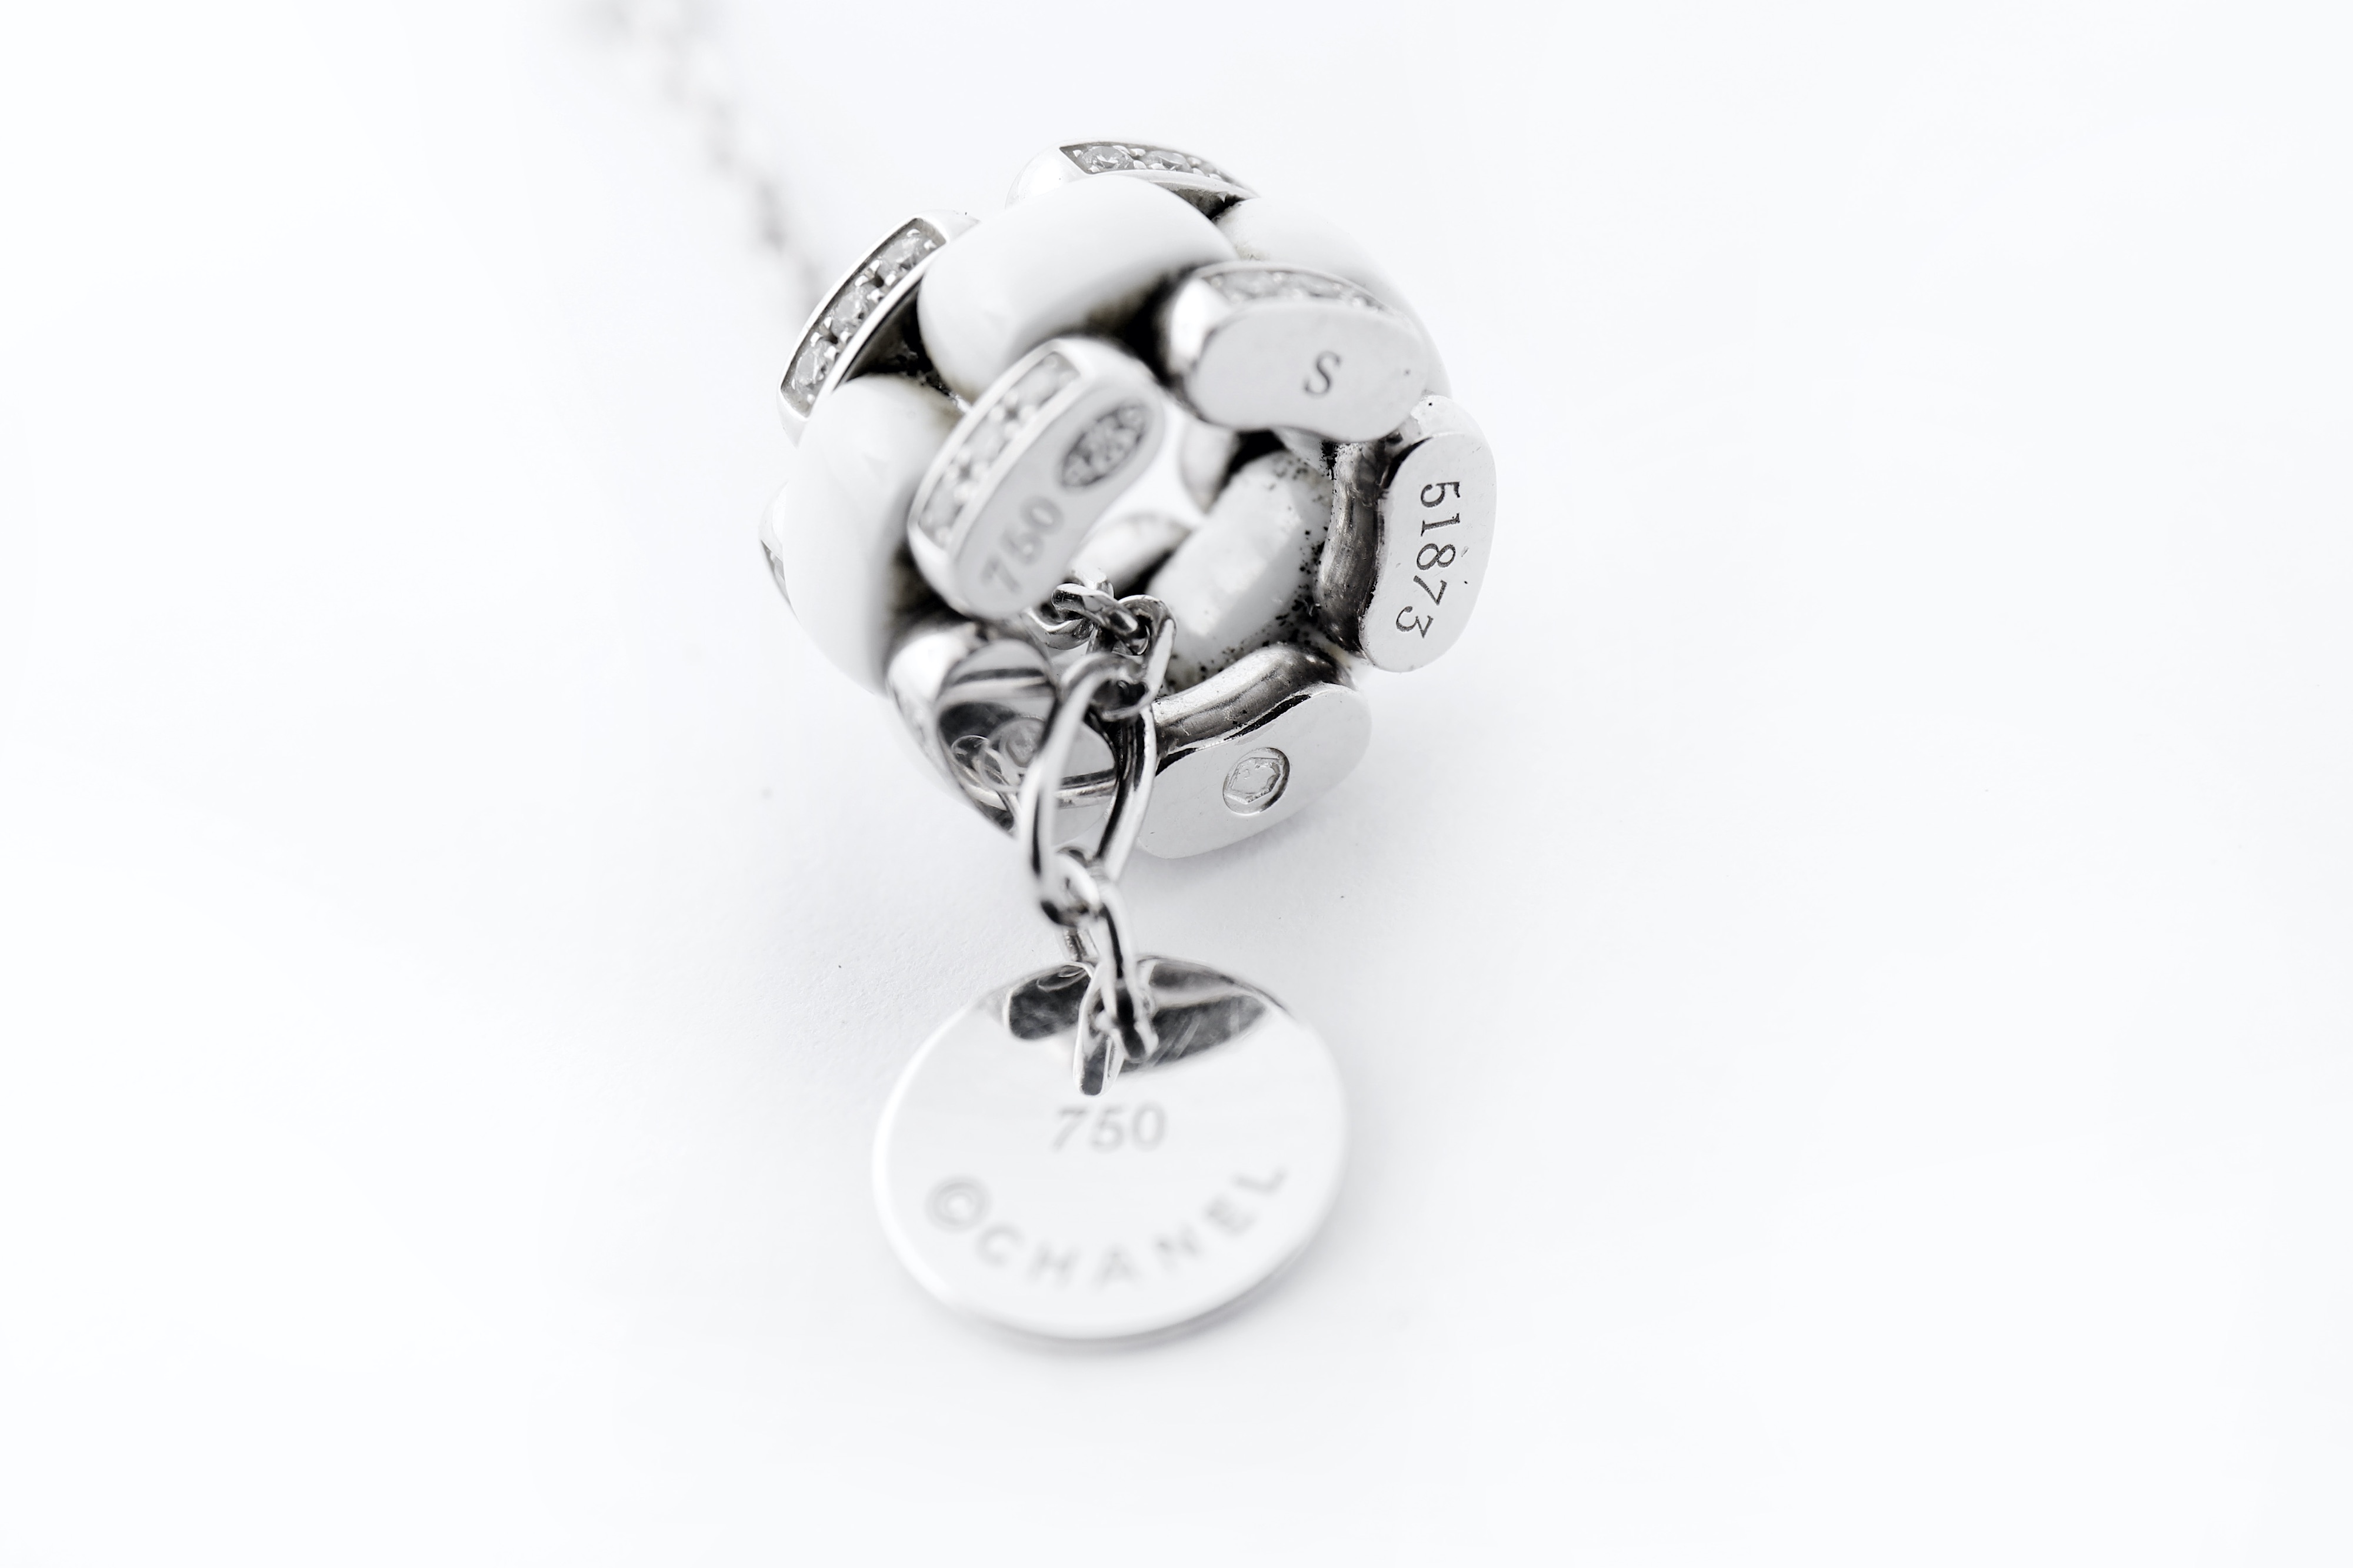 A ceramic and diamond 'Ultra' pendant necklace, by Chanel - Image 4 of 5